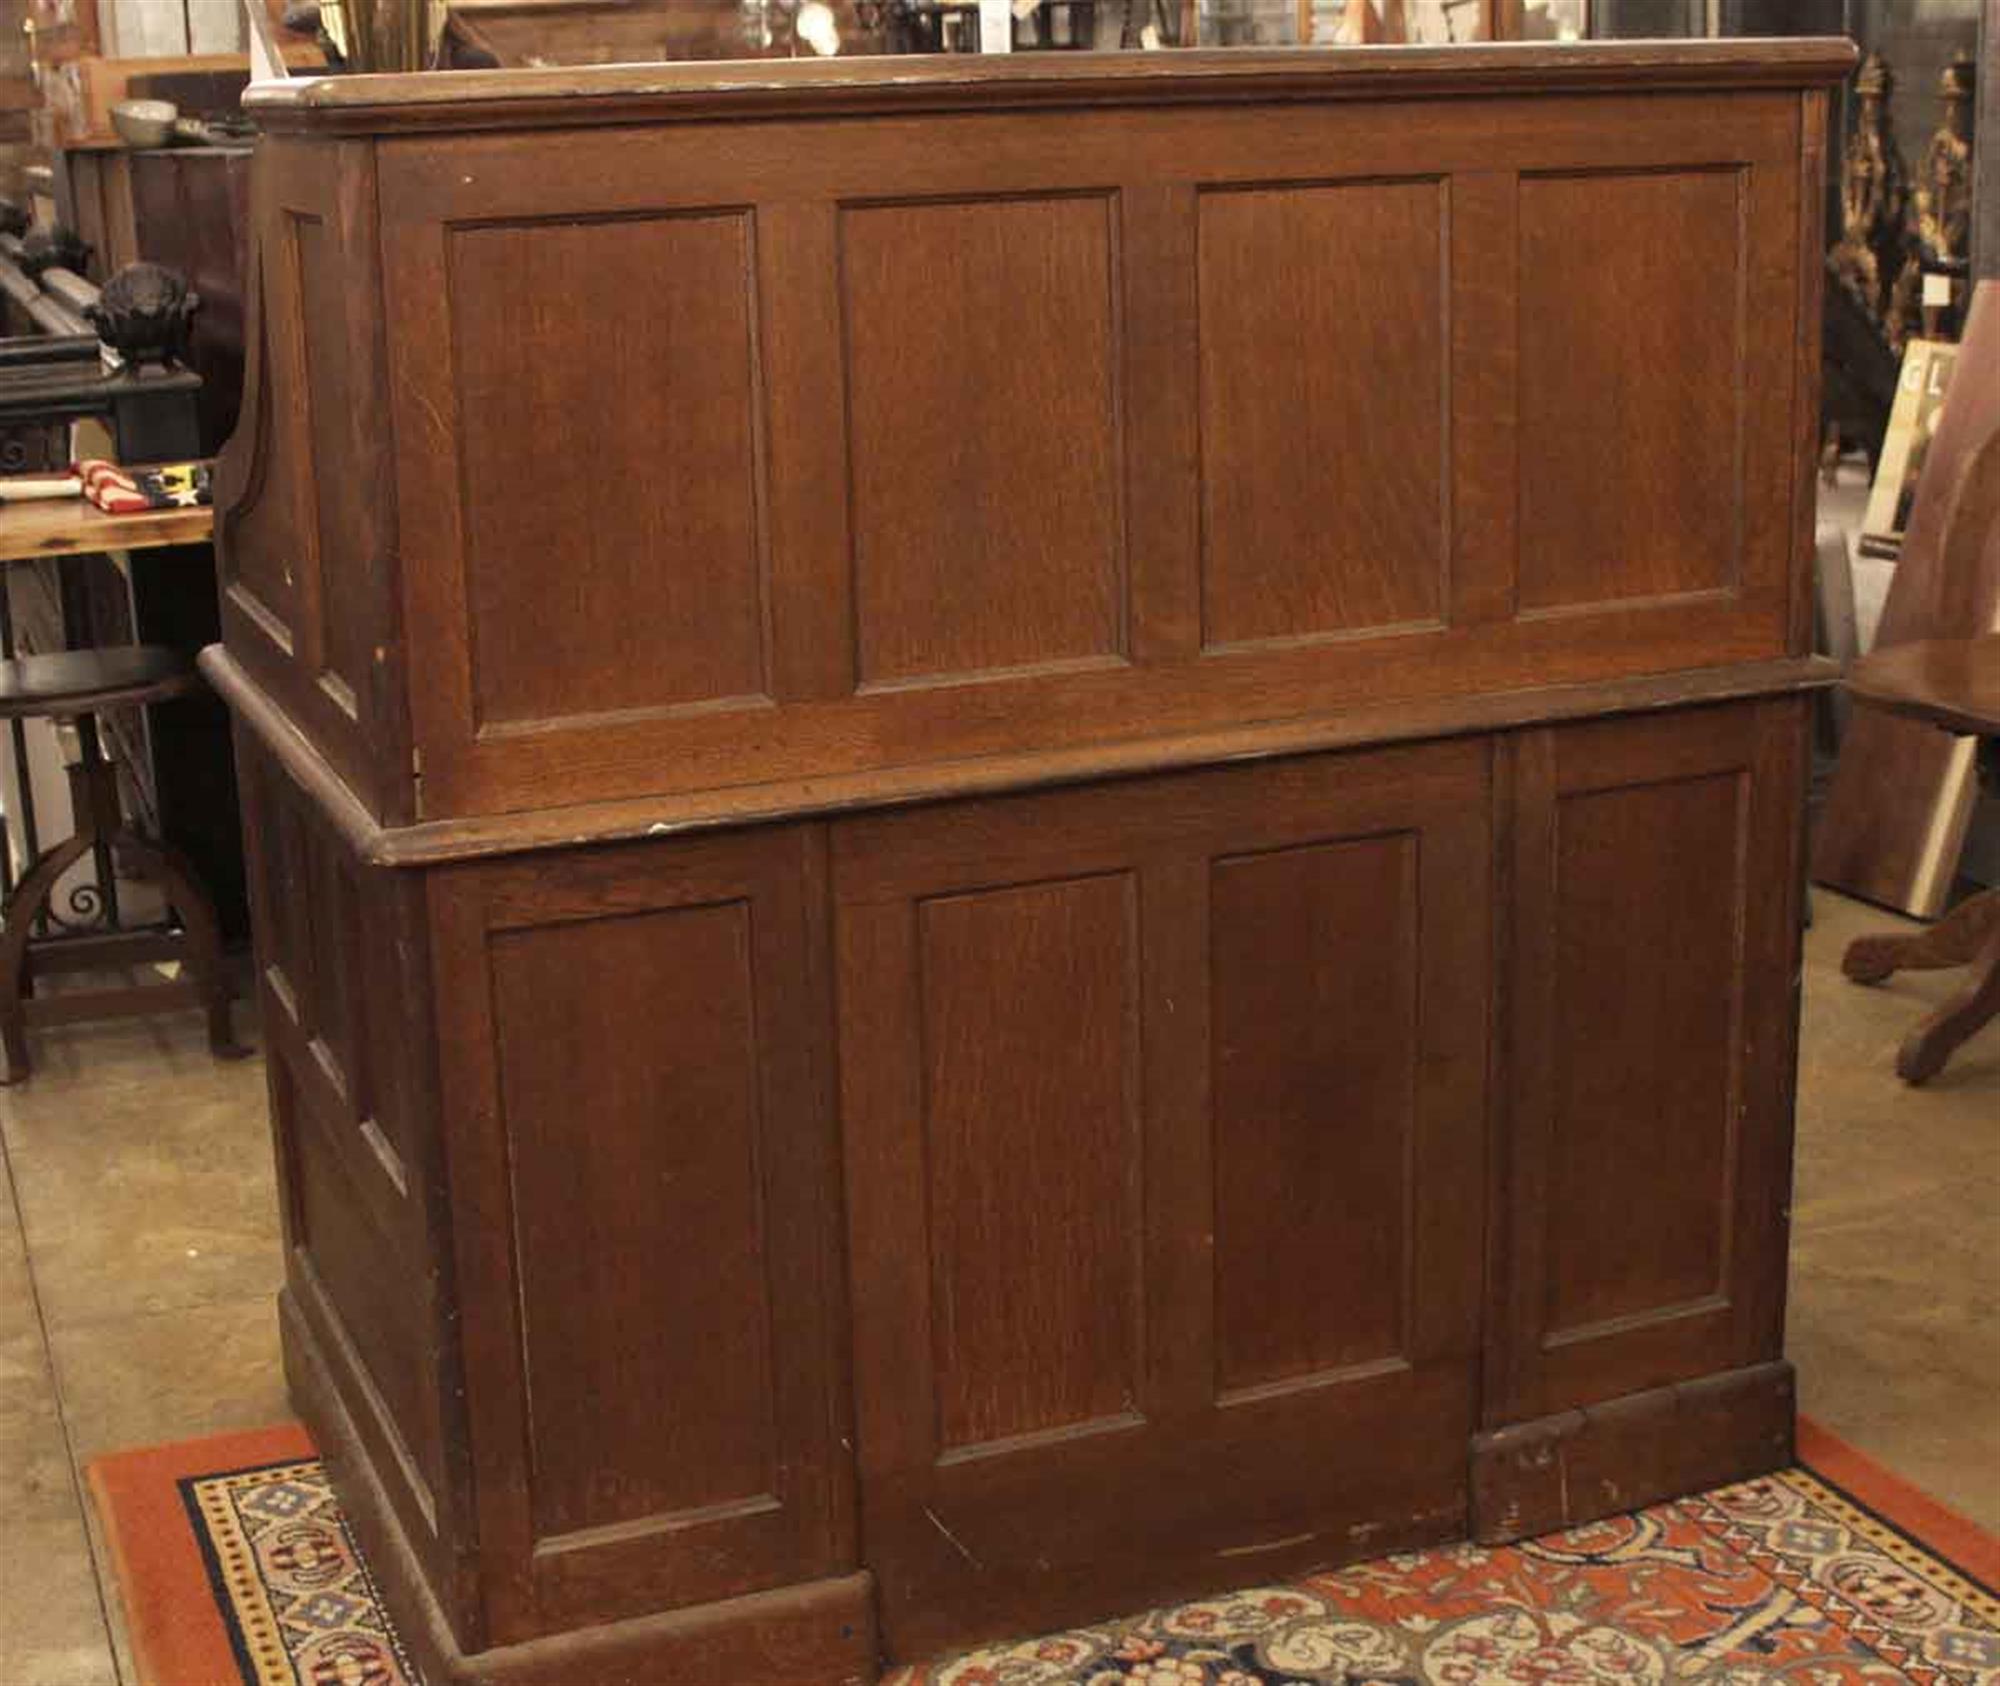 Industrial 1880s Oak Roll Top Desk with Seven Drawers and Neat Cubbyhole Storage